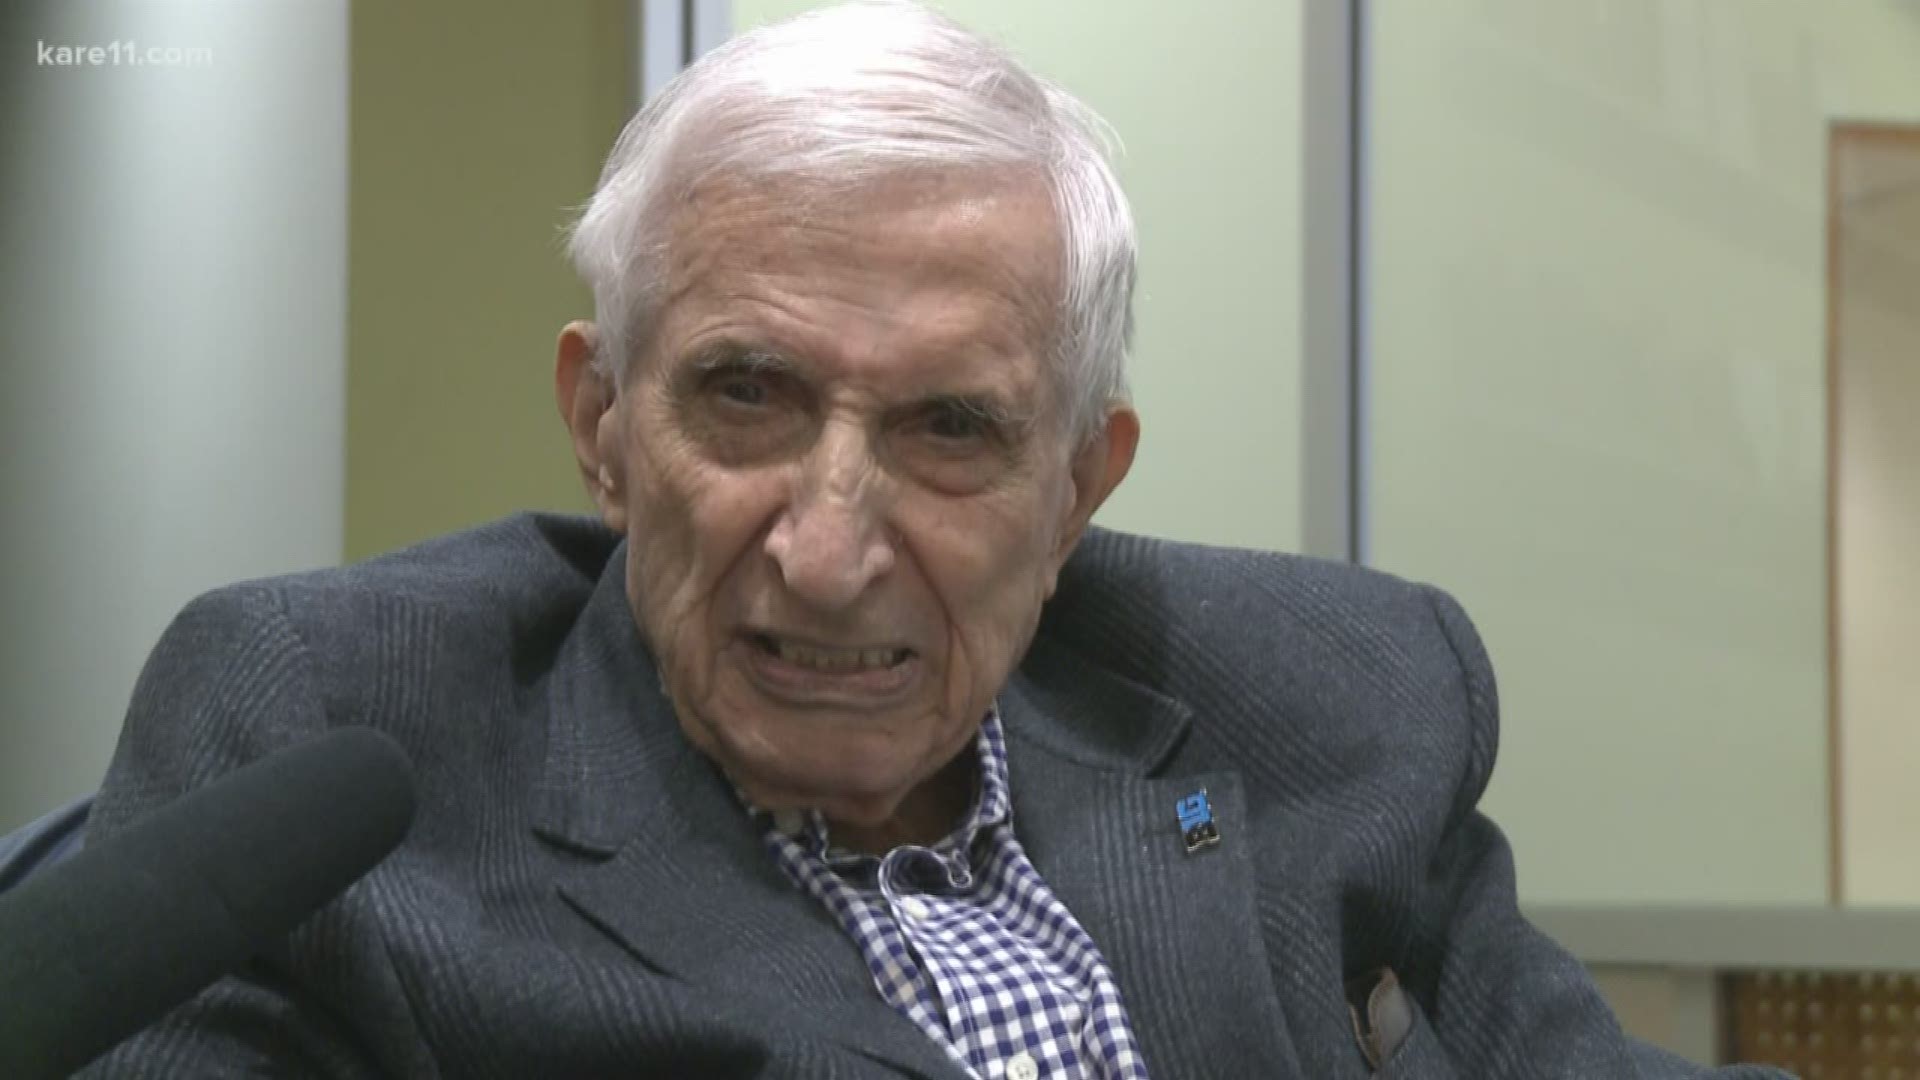 Sid Hartman celebrated his birthday the only way he knows how.